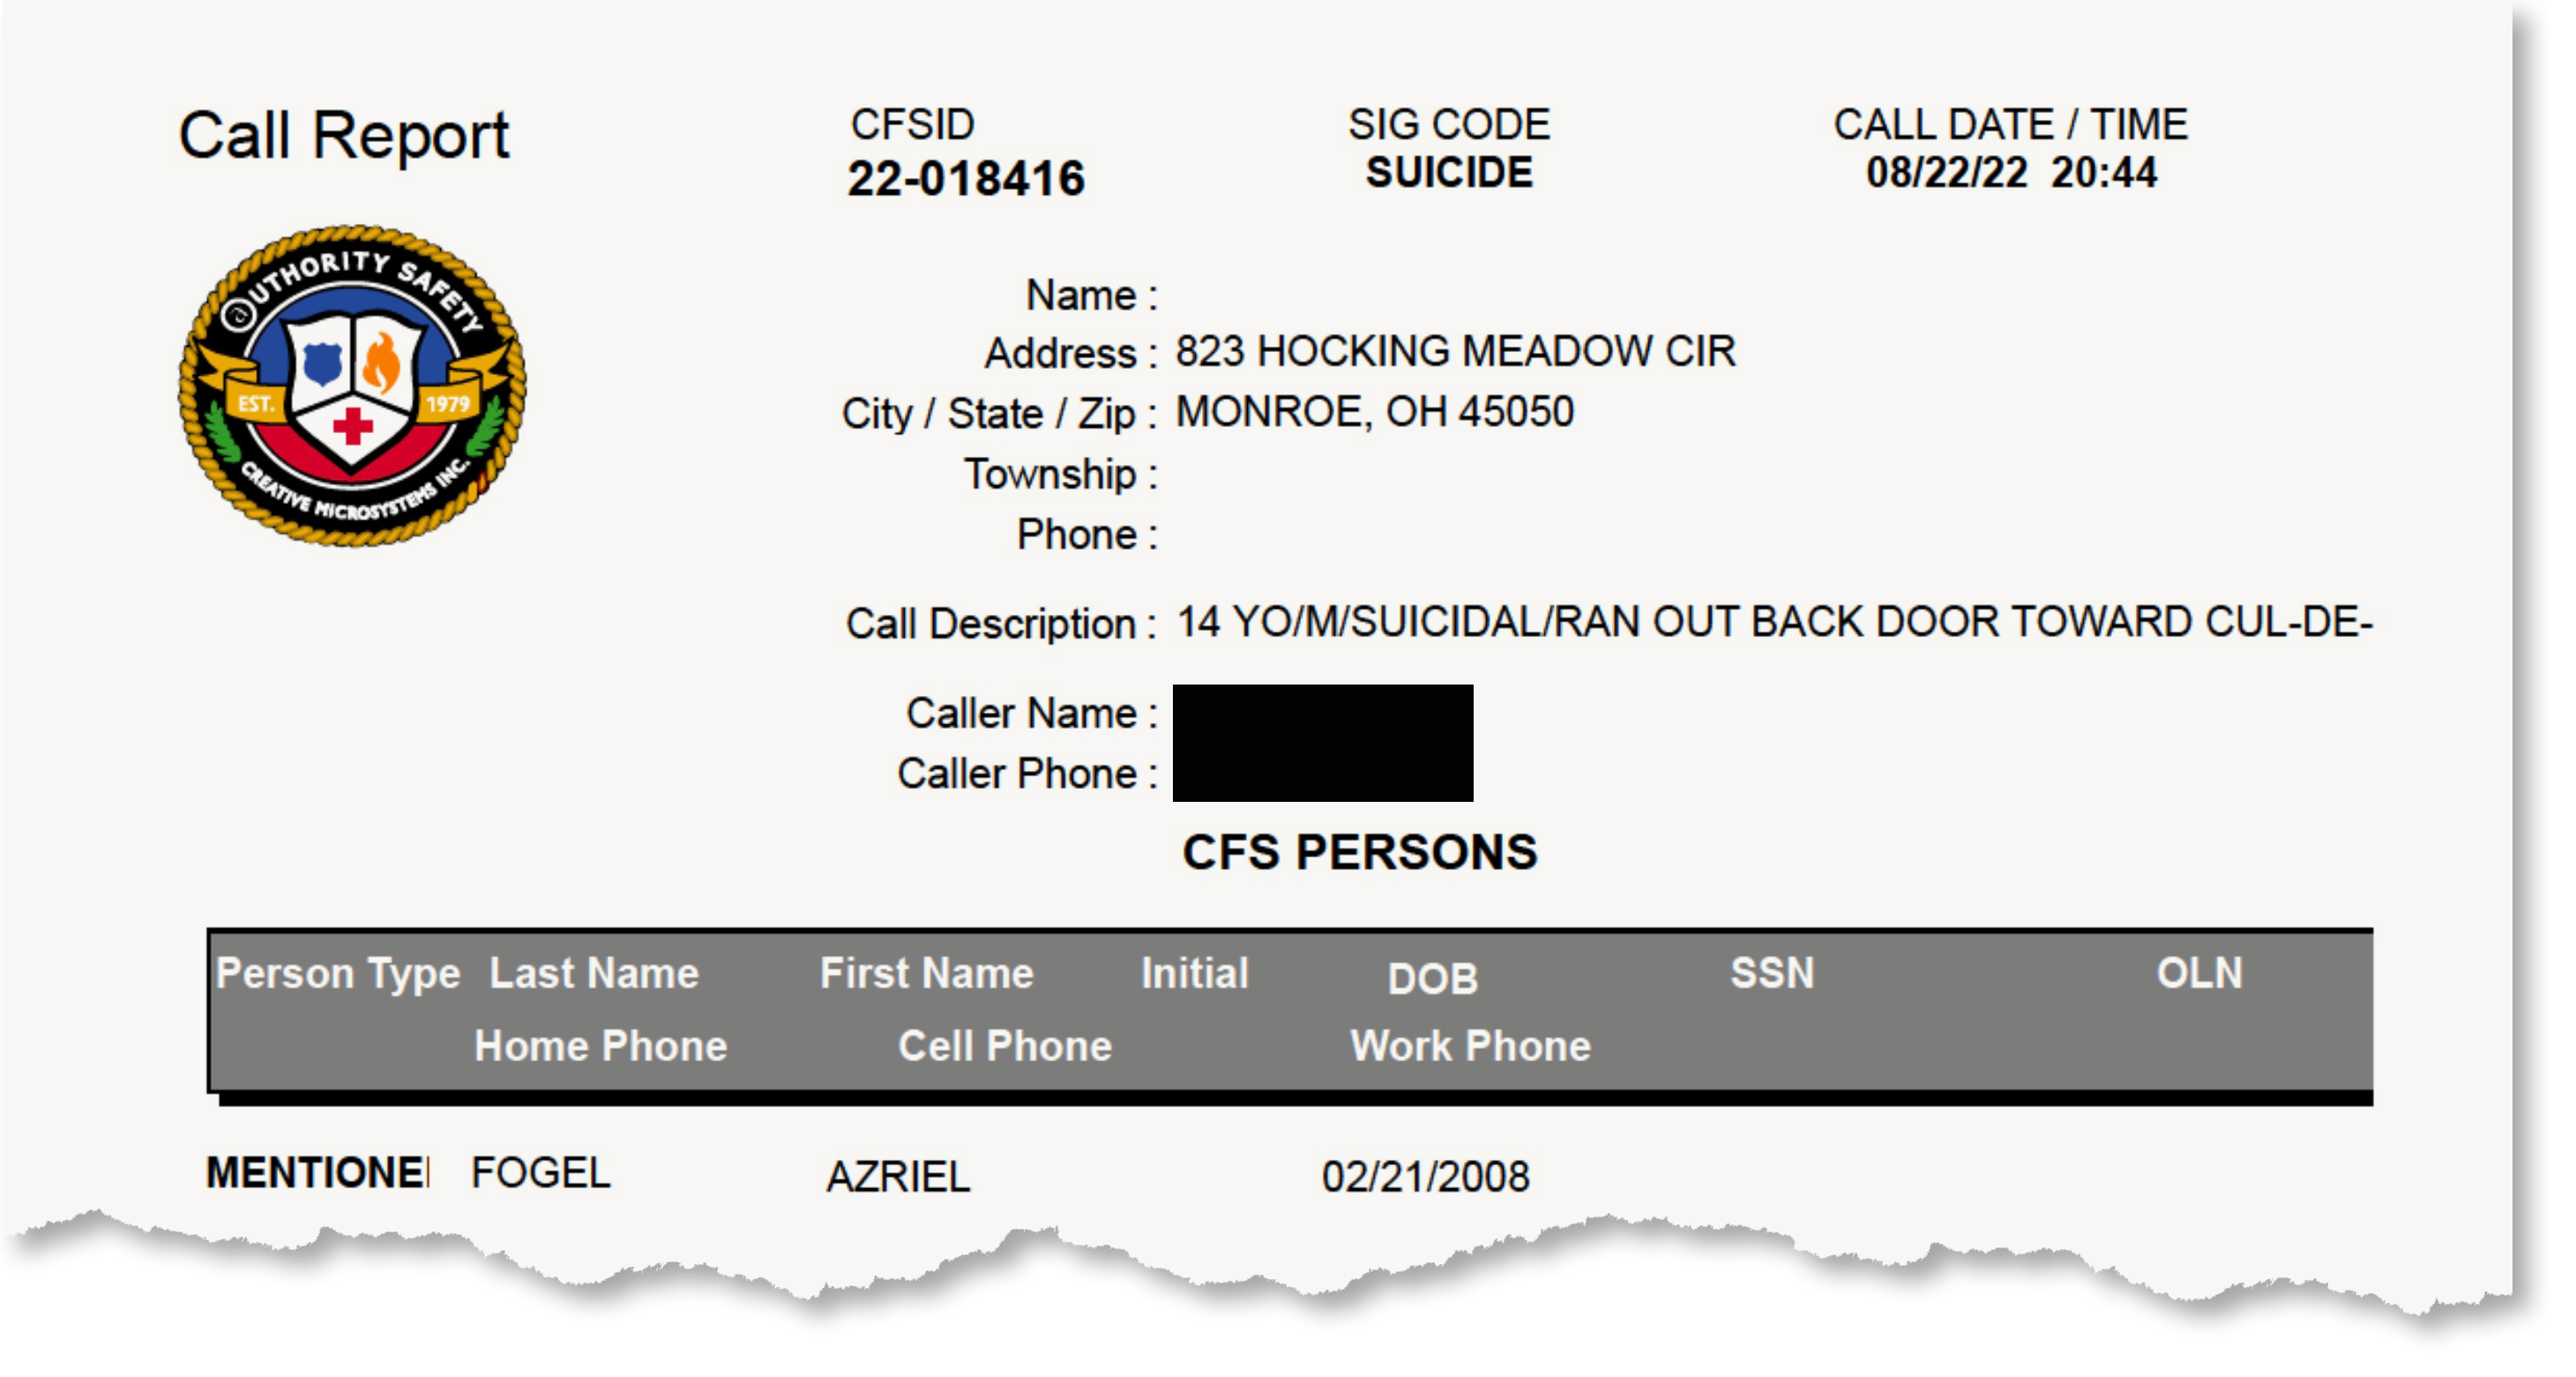 A police report from a call about Azriel Fogel being suicidal